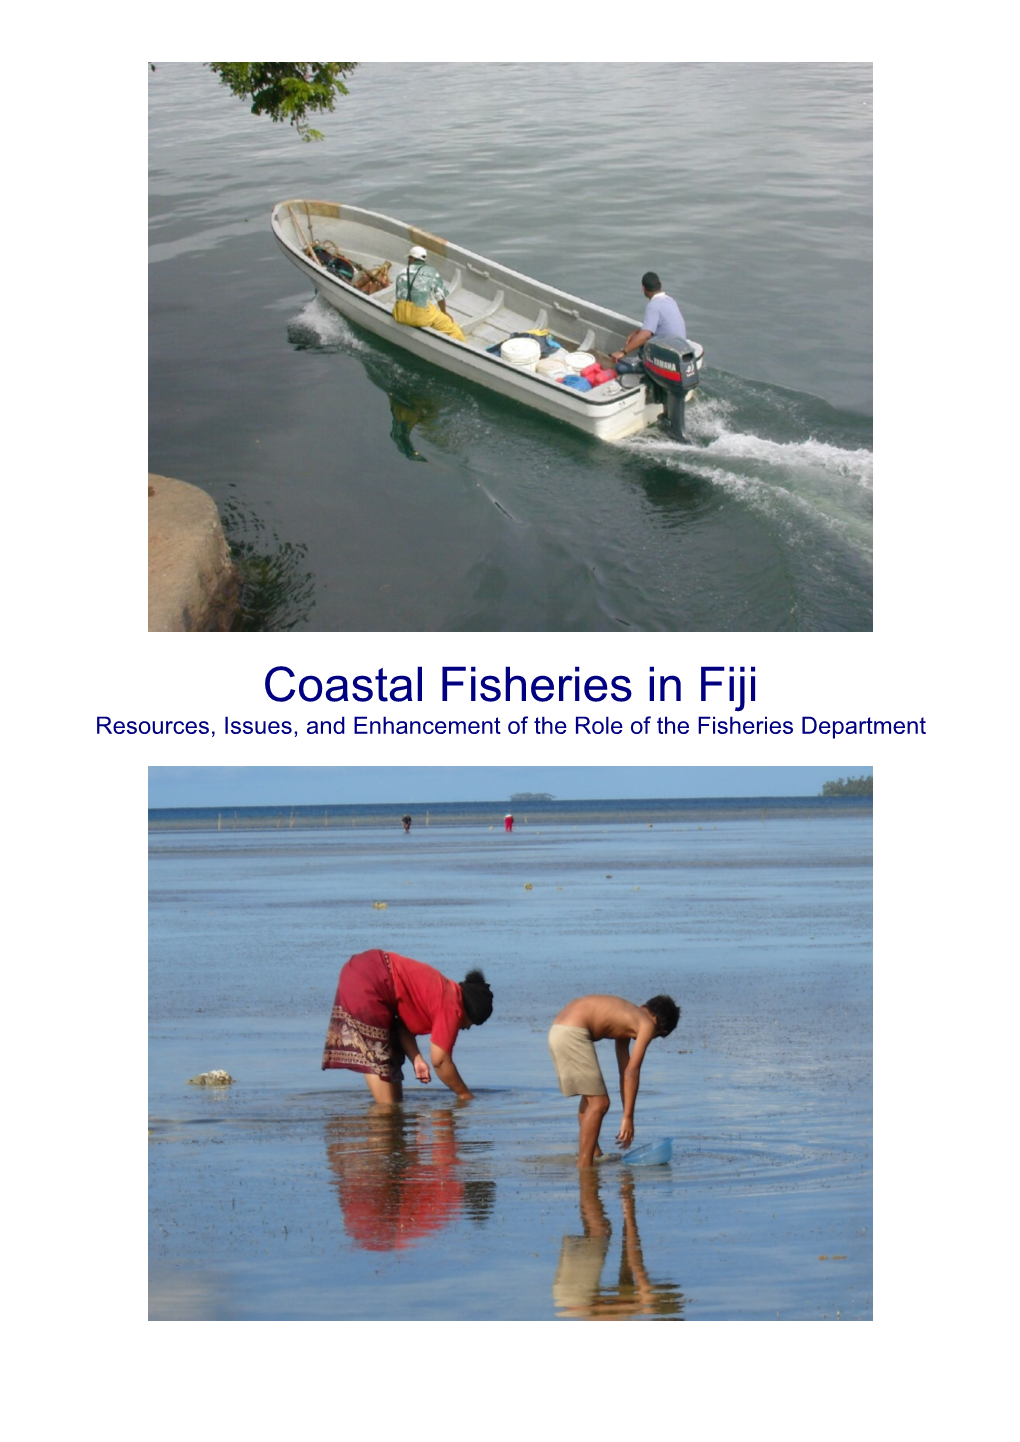 Coastal Fisheries in Fiji Resources, Issues, and Enhancement of the Role of the Fisheries Department